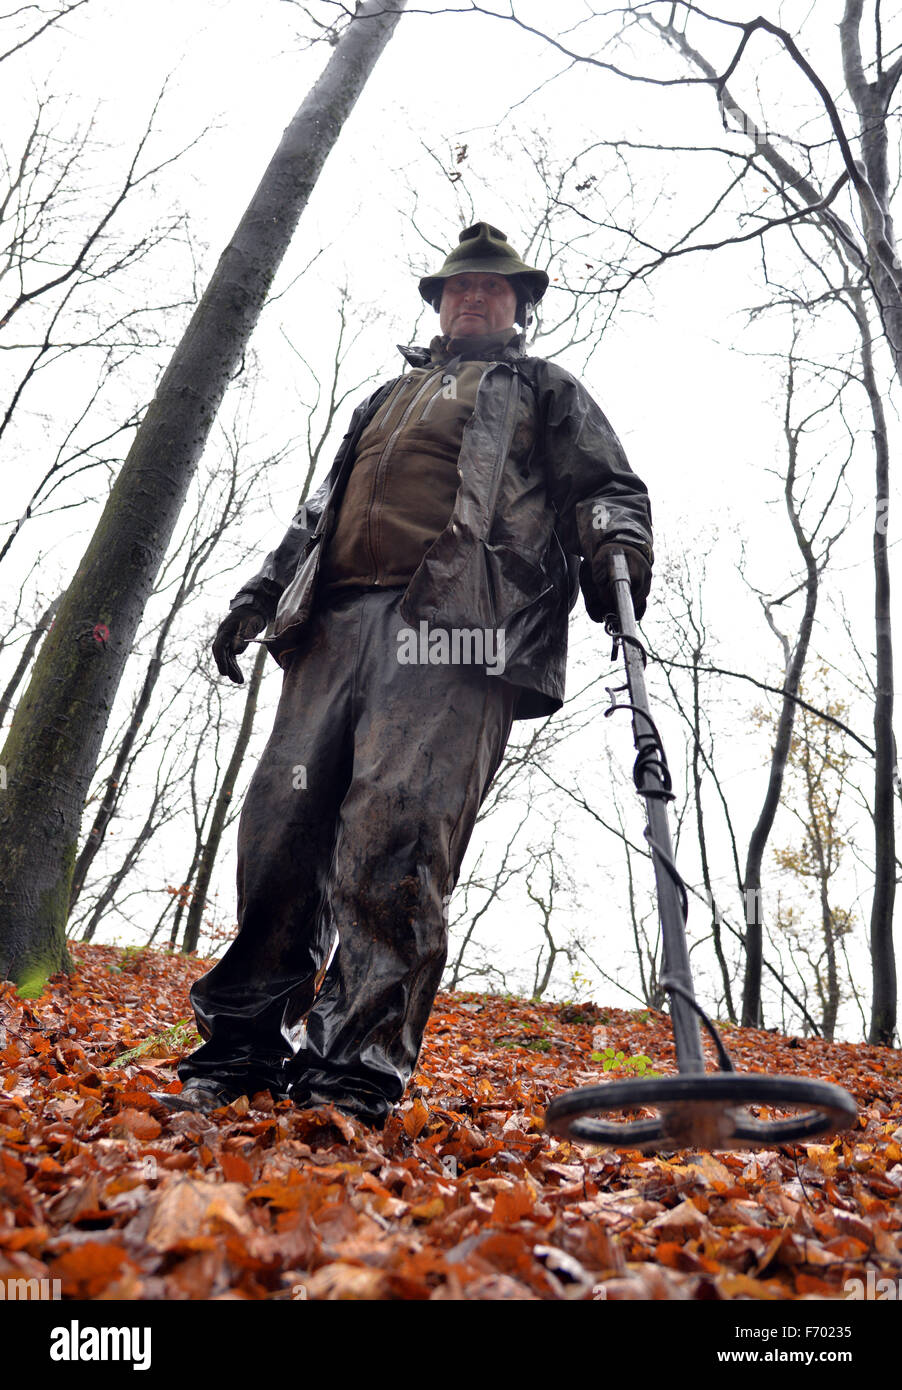 Riol, Germany. 17th Nov, 2015. Karl-Ludwig Hohentann from Hofheim walks around a wooded hill with a metal detector near Riol, Germany, 17 November 2015. Hohentann is searching the forest floor for remains of a battle between the Celtic-Germanic tribe the Treveri and the Roman Emperor Vespasian in the year 70. Photo: Harald Tittel/dpa/Alamy Live News Stock Photo